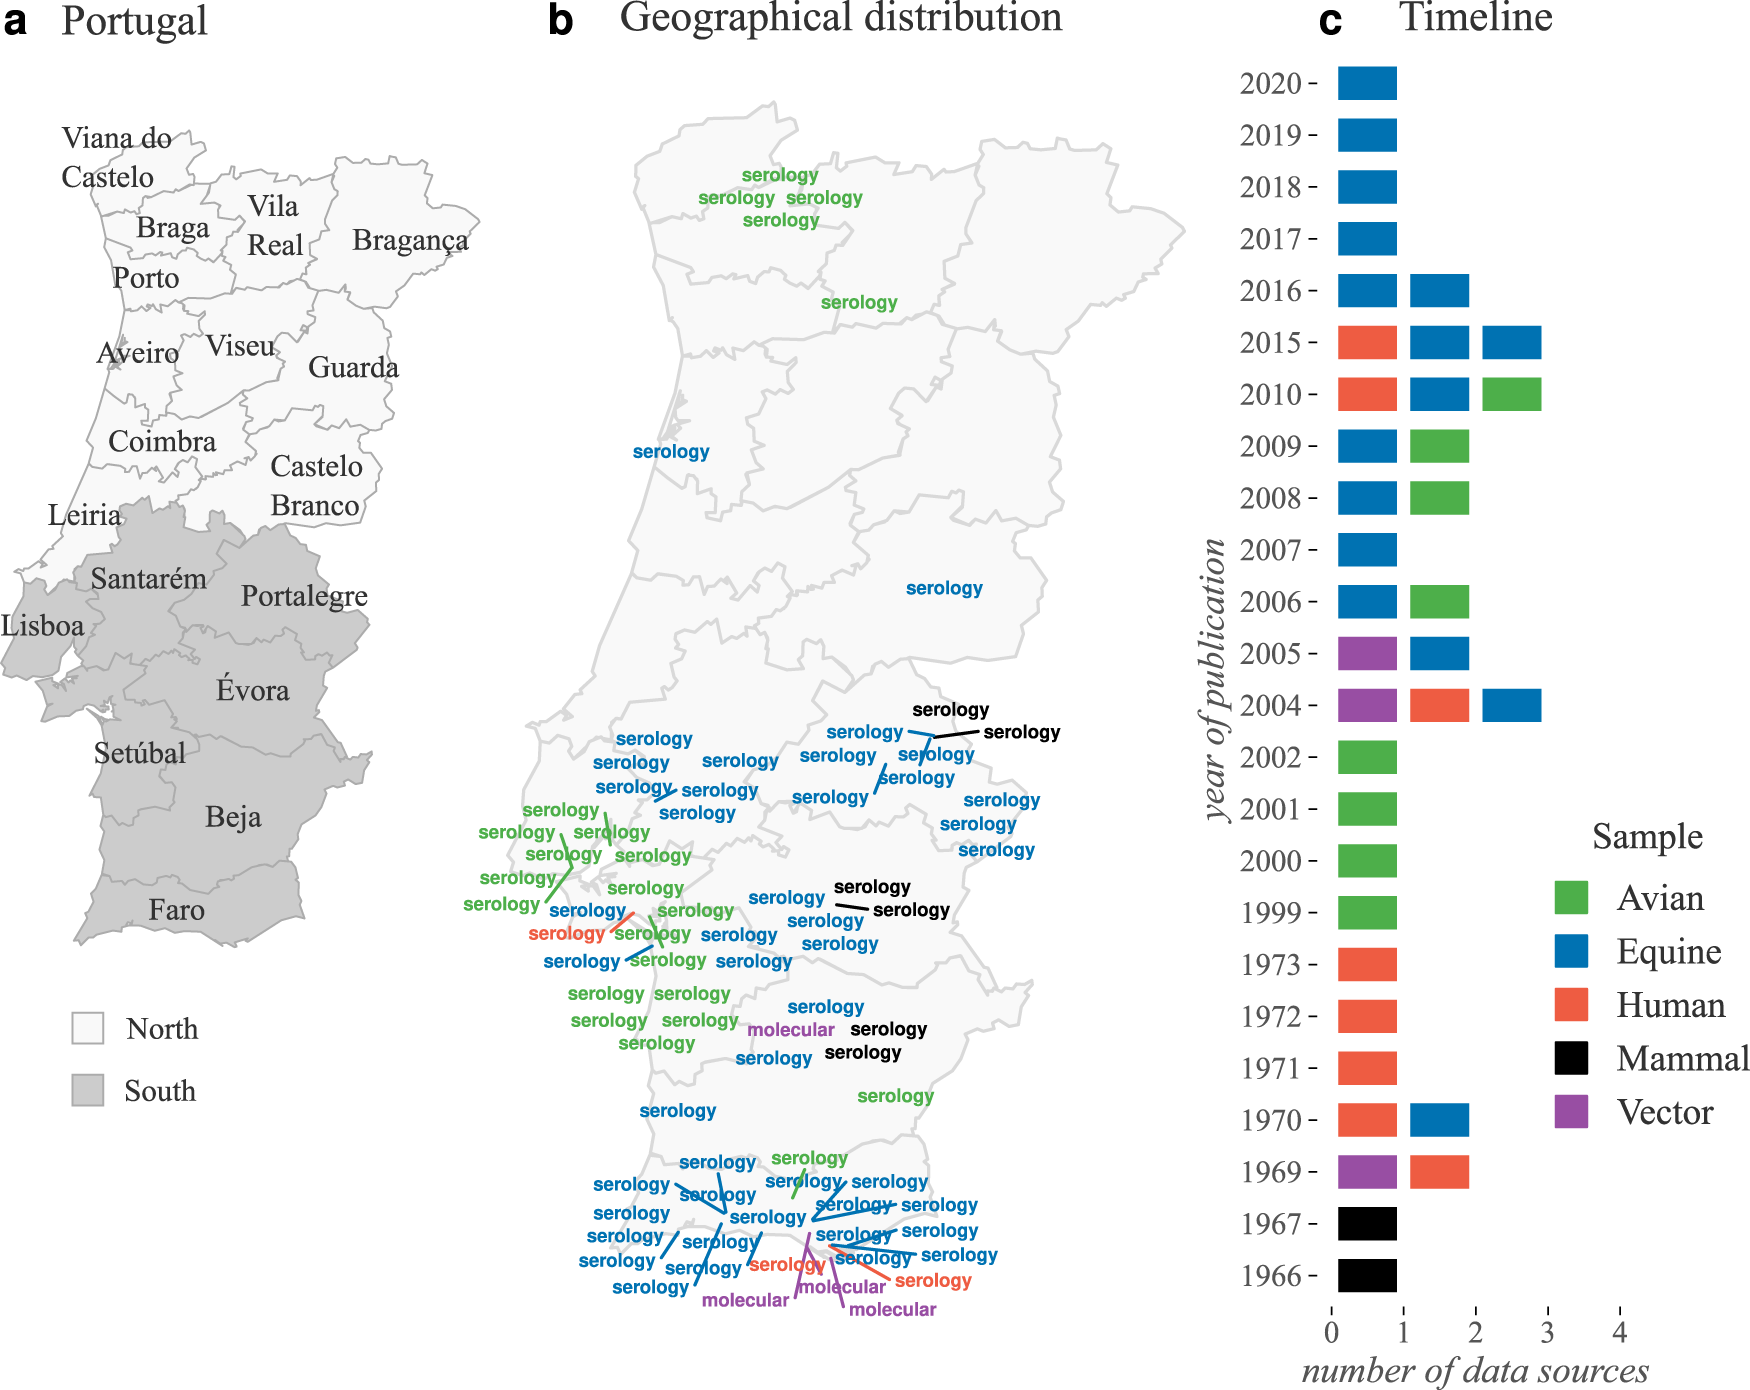 West Nile virus transmission potential in Portugal | Communications Biology